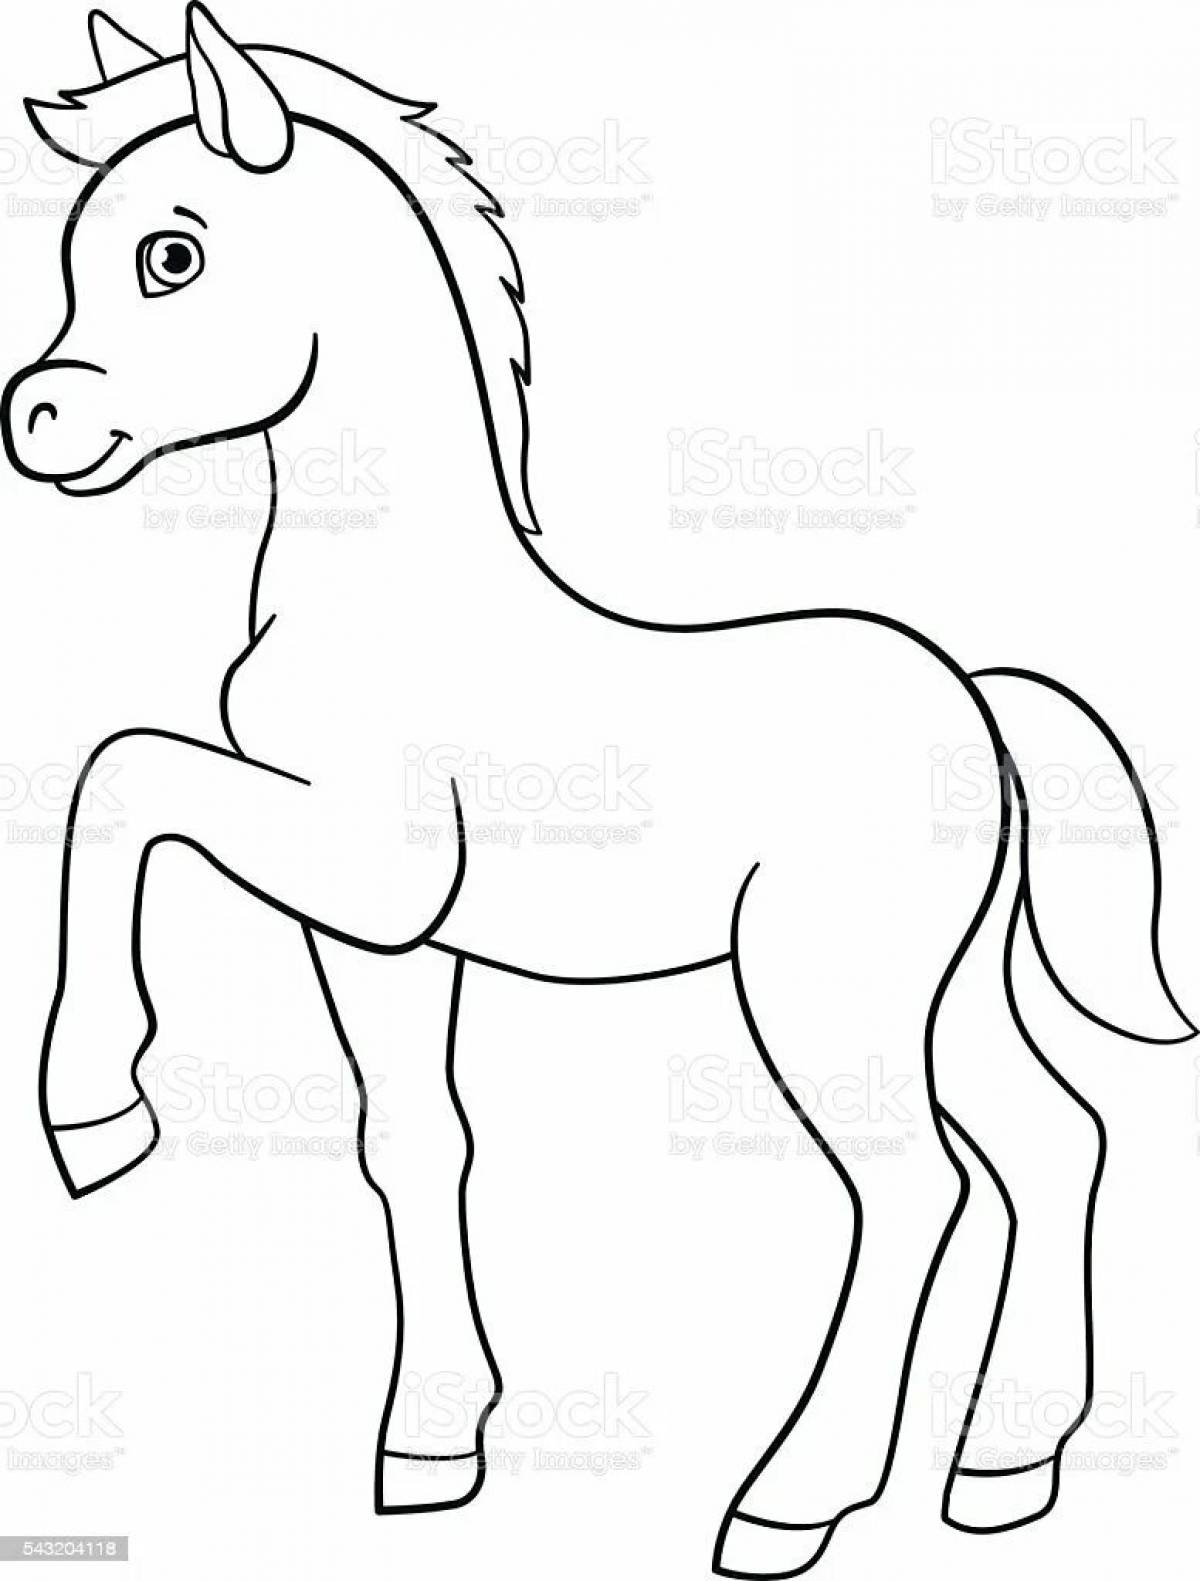 Coloring book noble foal for children